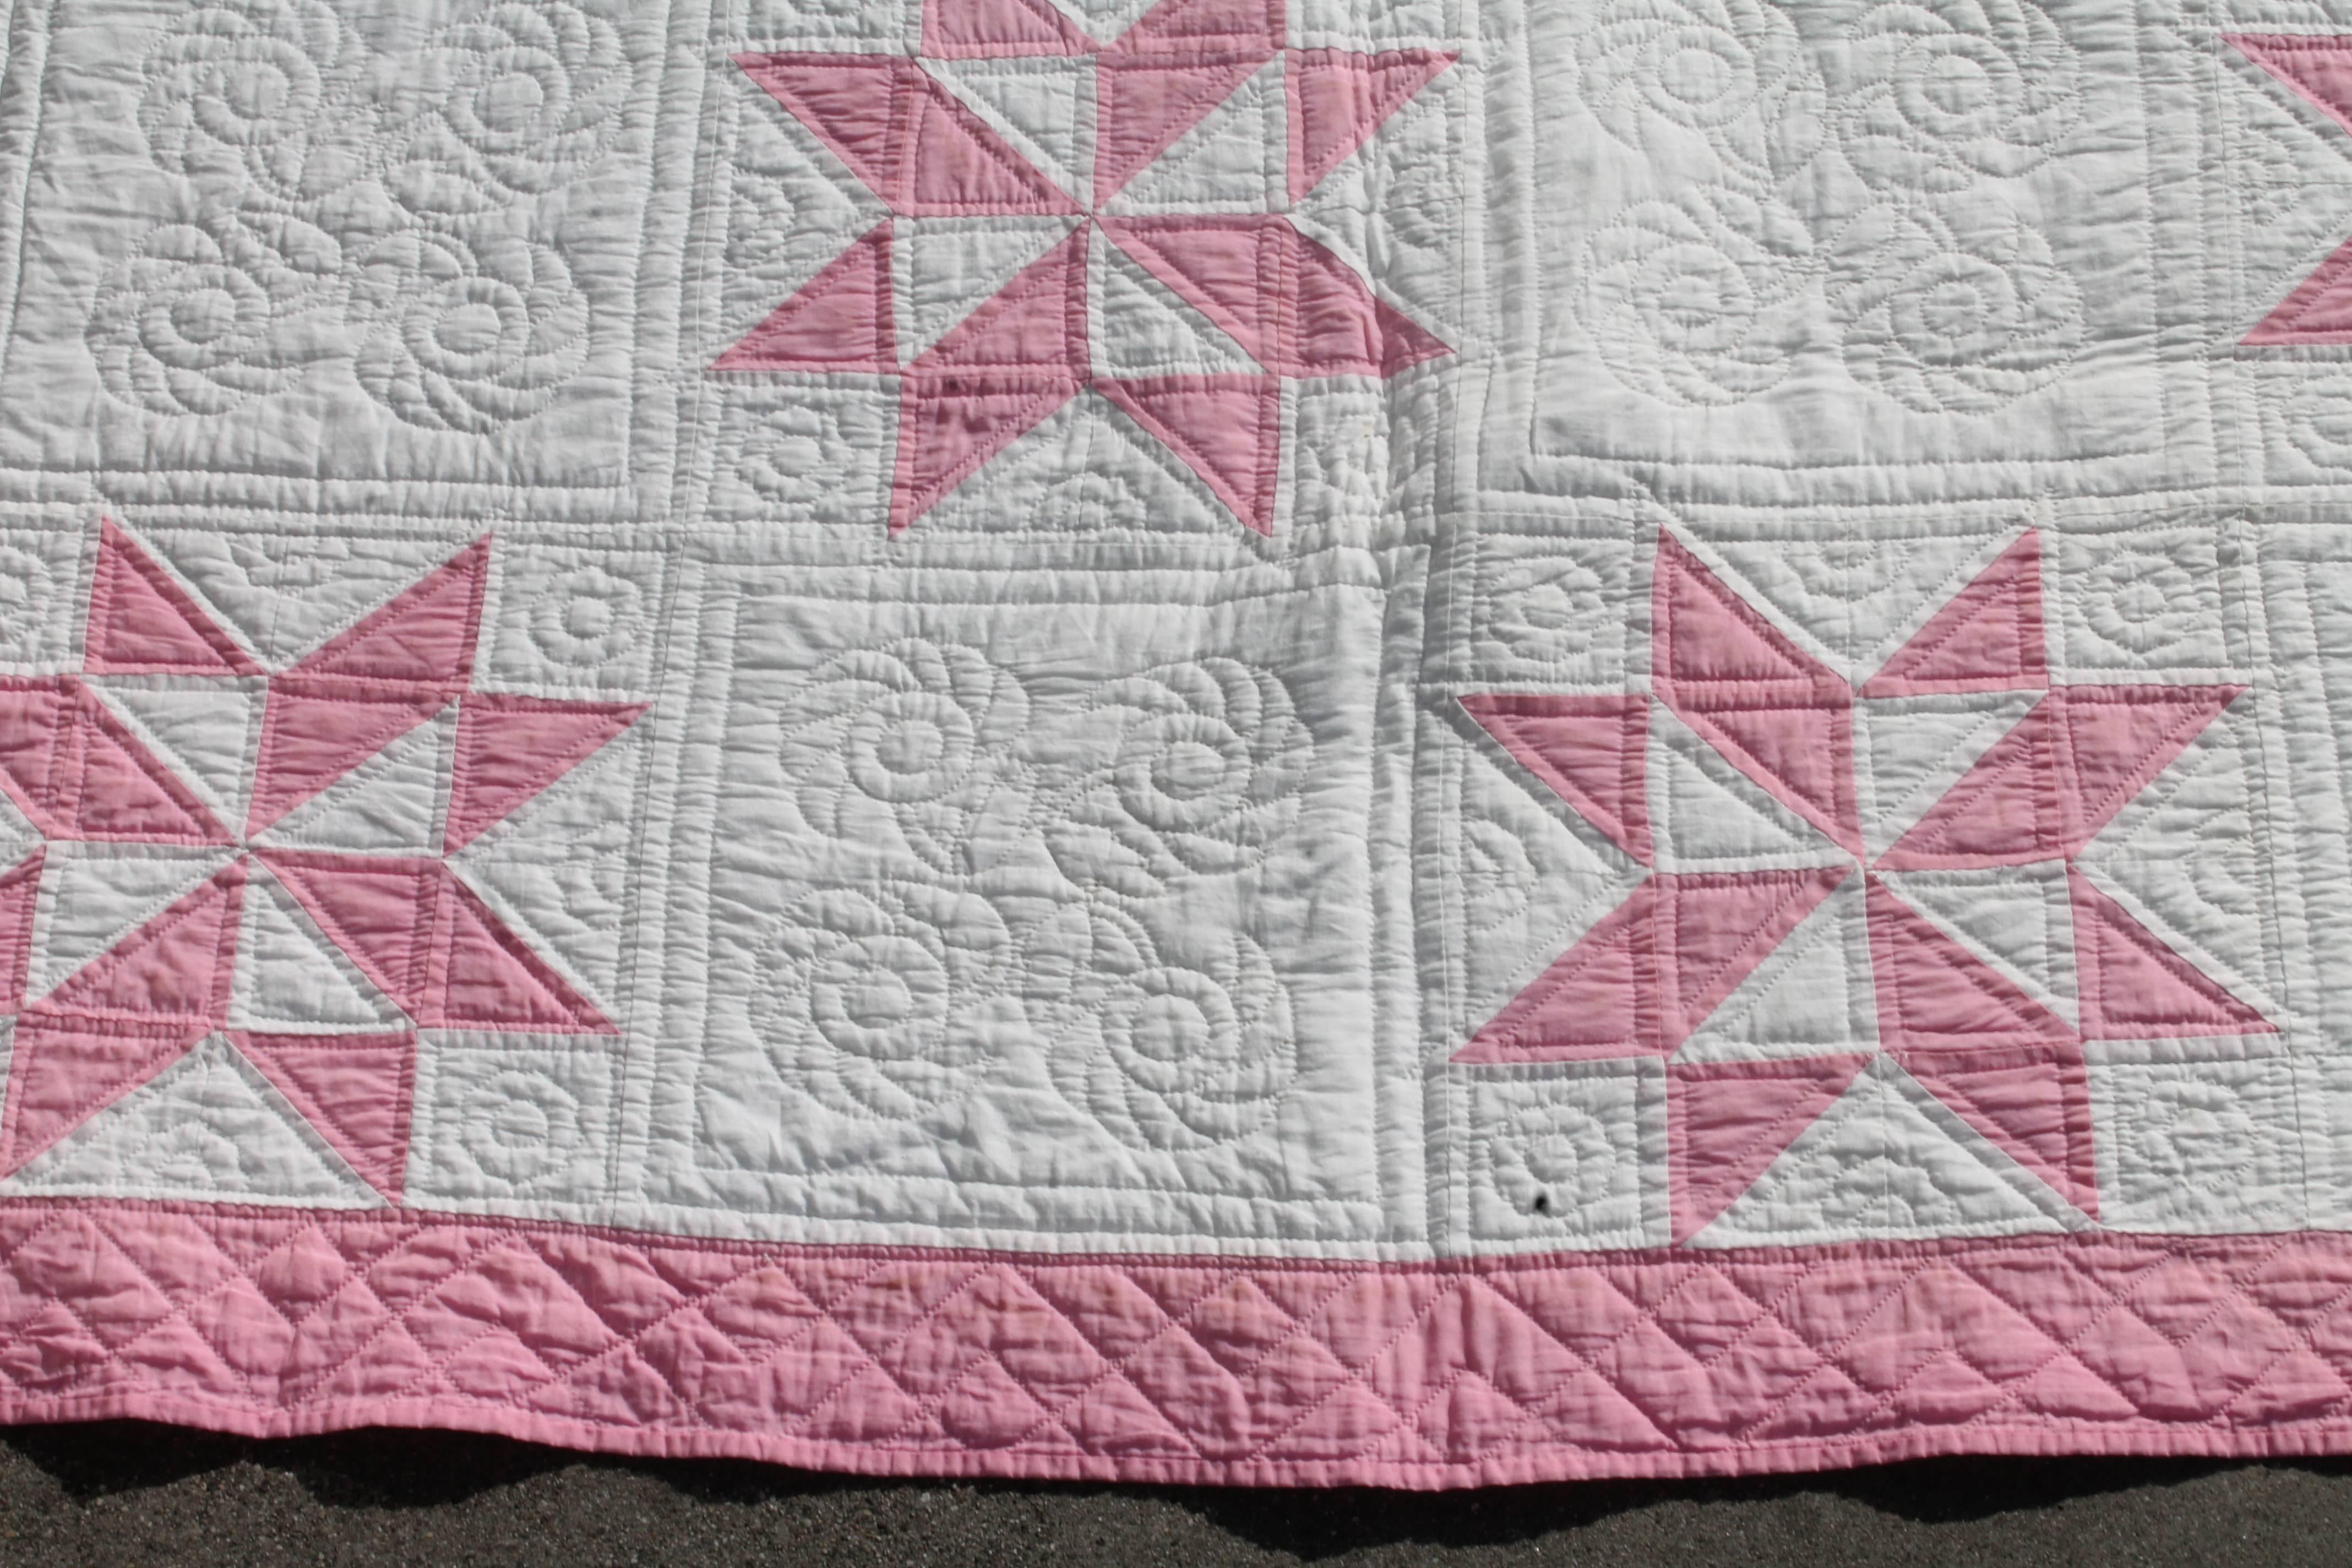 This early 19th century dusty rose eight point stars quilt is in fine condition and is loaded with cotton seeds. The quilting is very fine as well as the piece work too.